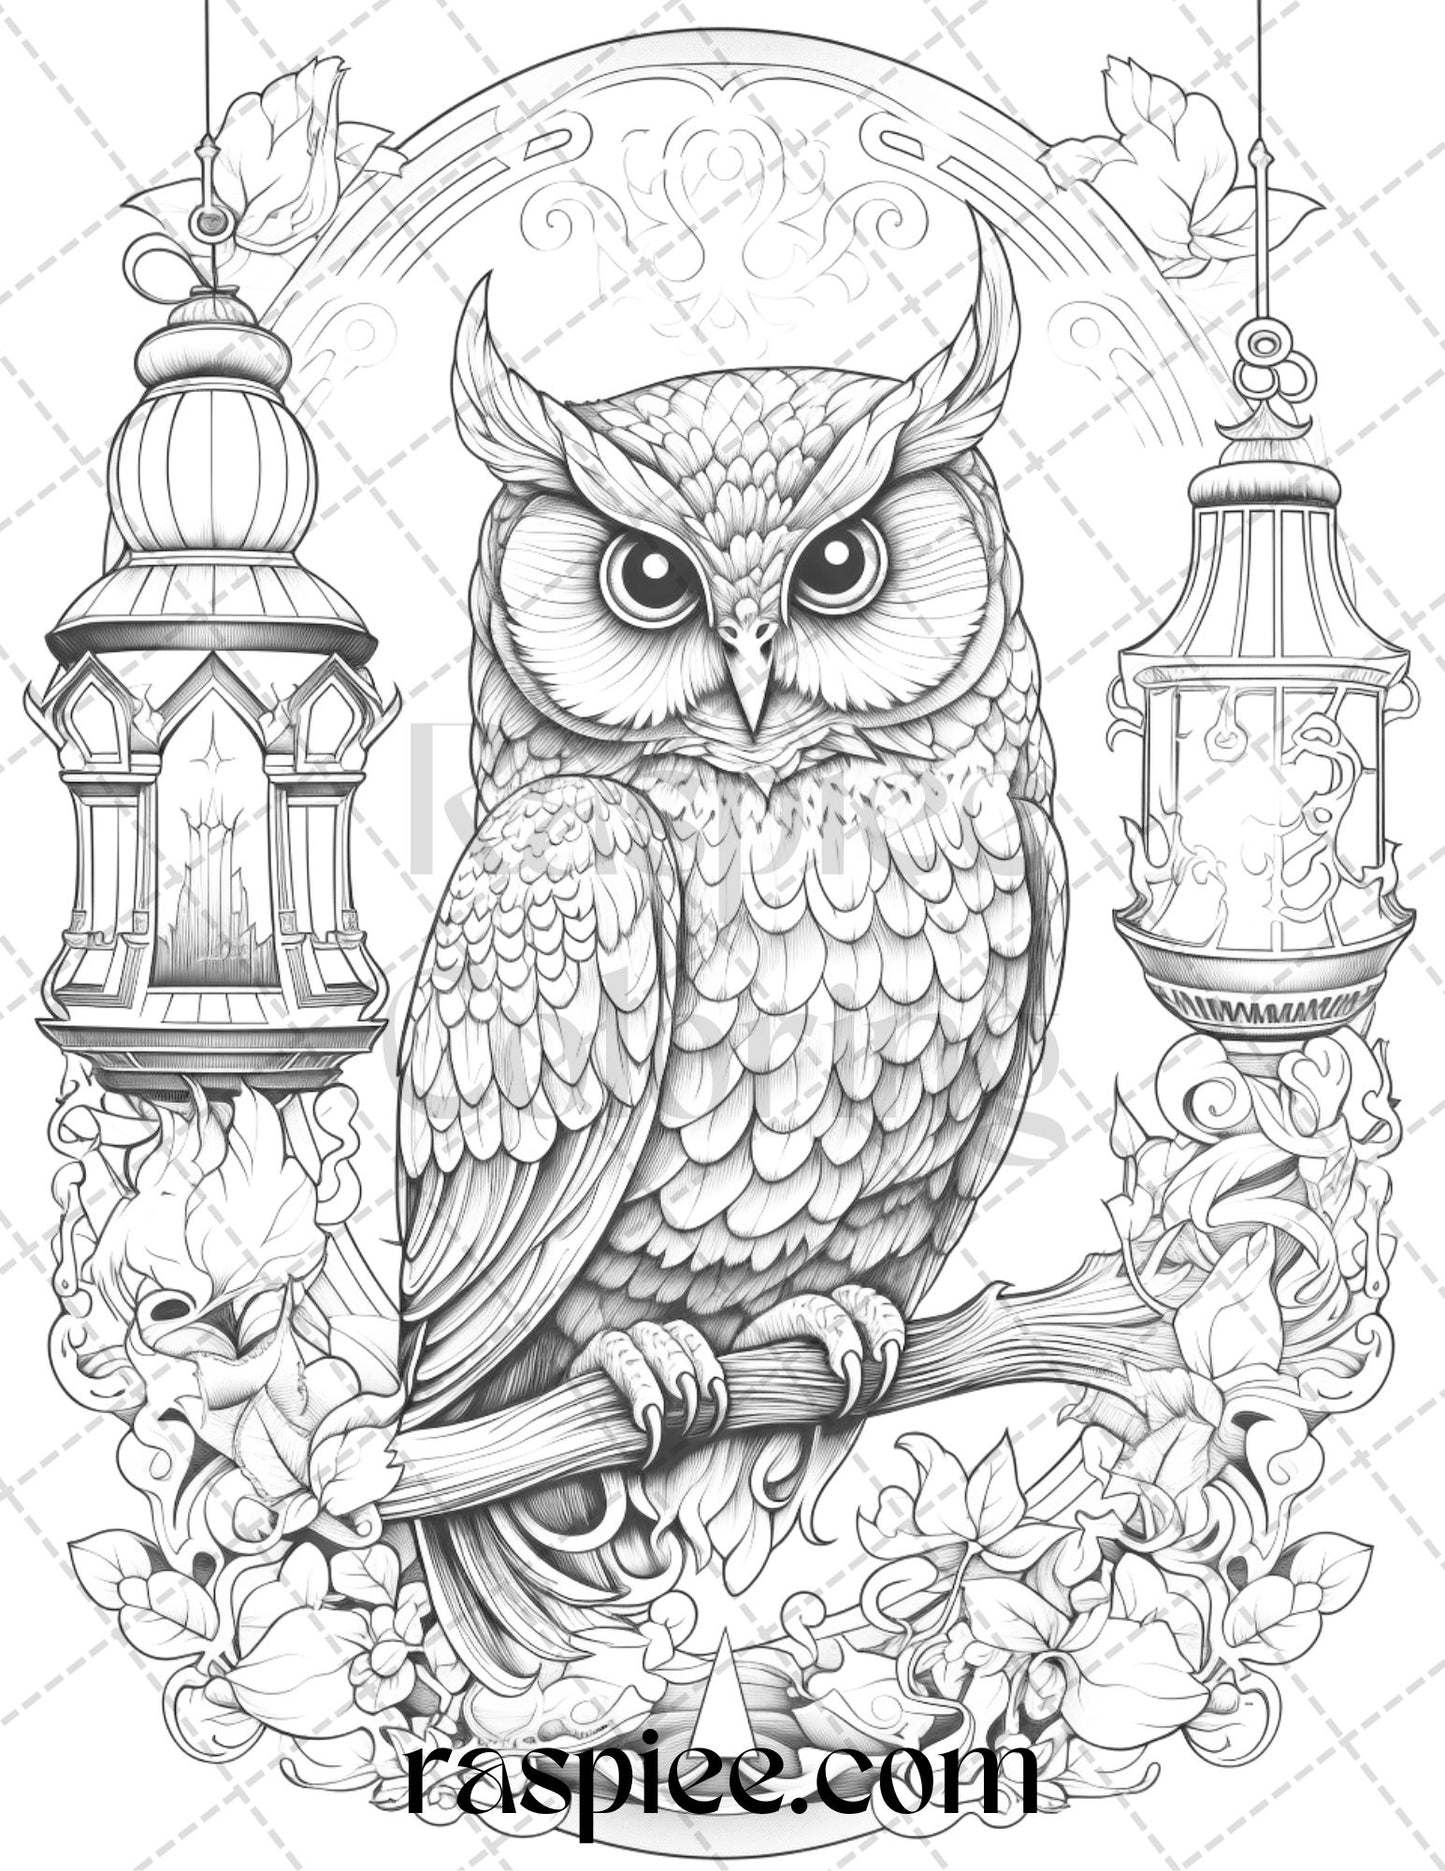 40 Floral Owl Grayscale Printable Coloring Pages for Adults, PDF File Instant Download